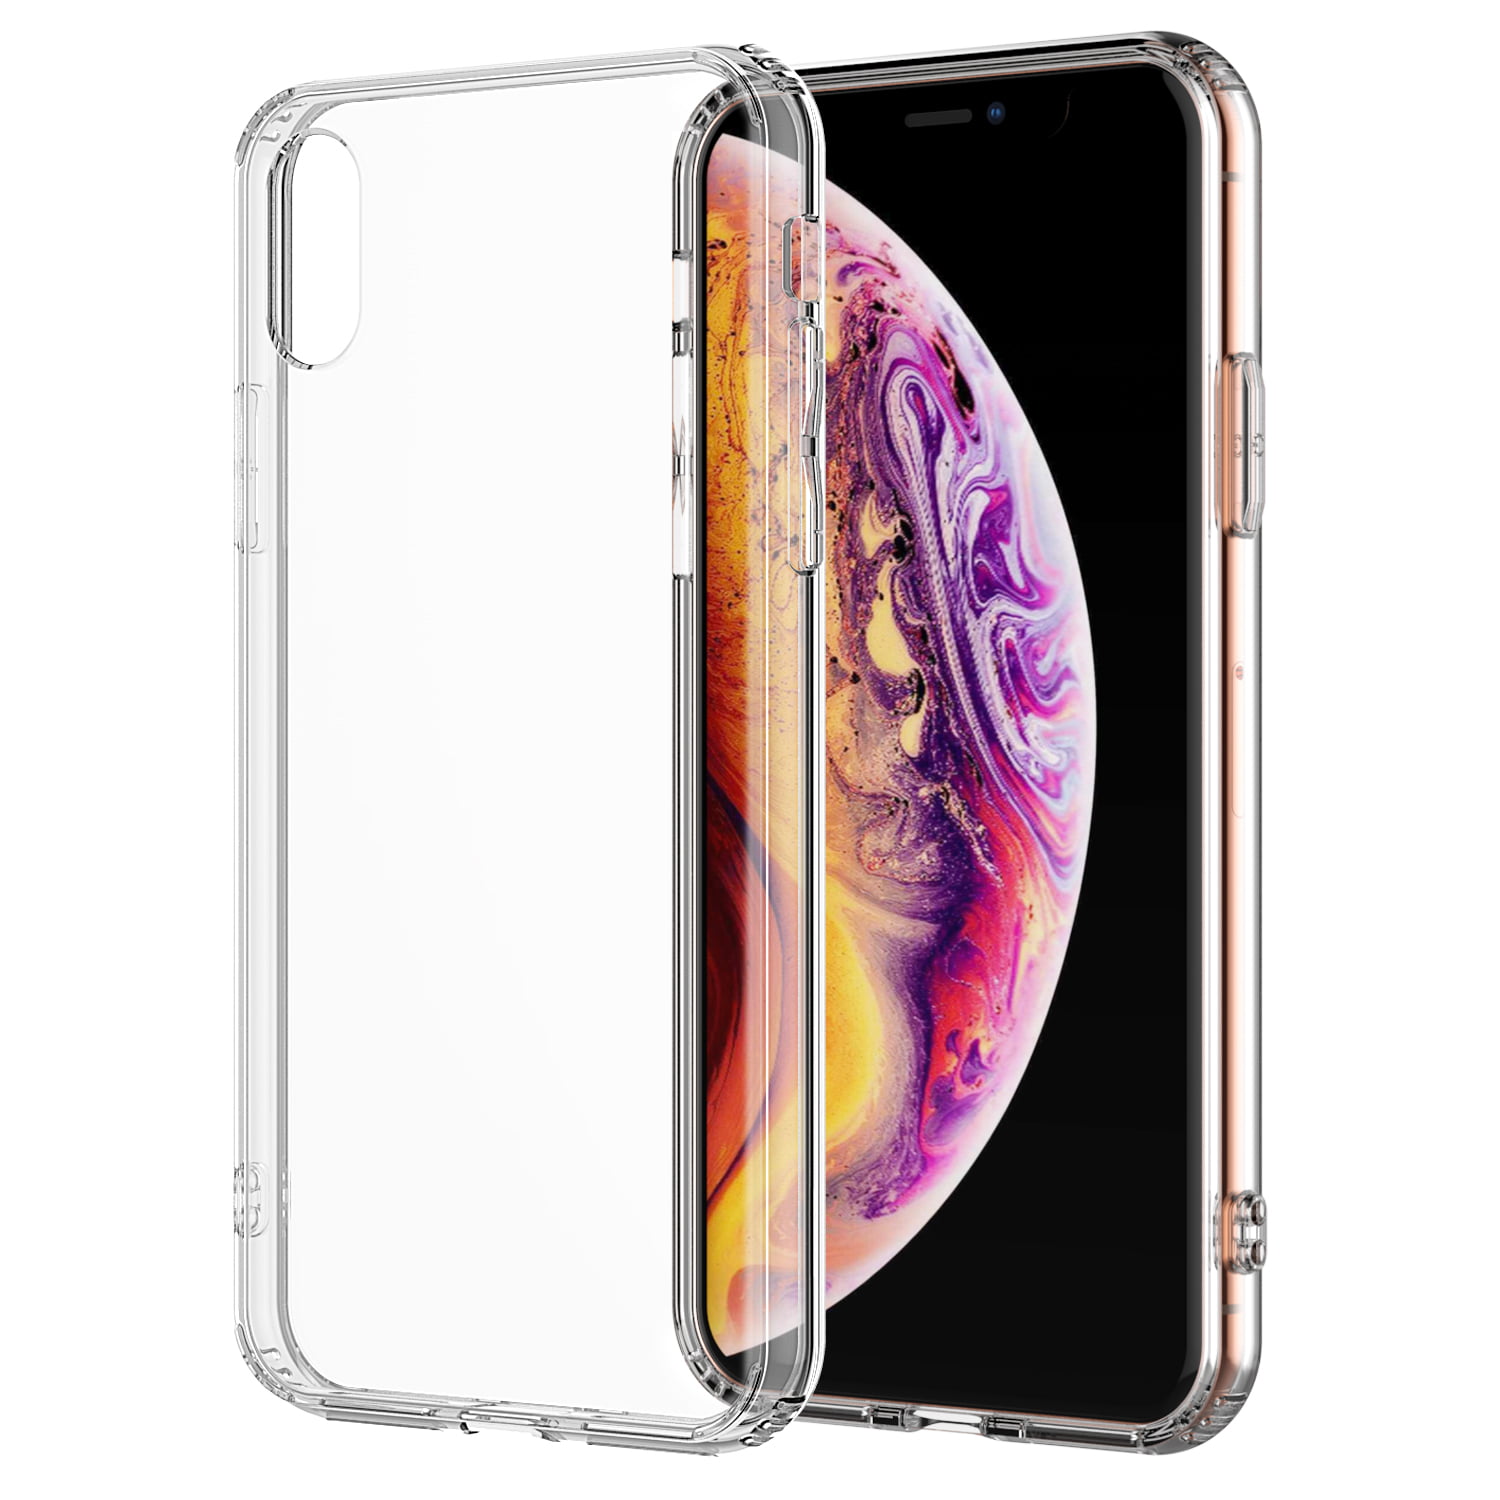 Soft and Lightweight Design Silicone Case CoverGel TPU Case for iPhone X iPhone X Case Ultra Slim Crystal Clear TPU Shock-Absorption, Anti-Scratching, Slide-Proof View  Detail Page 